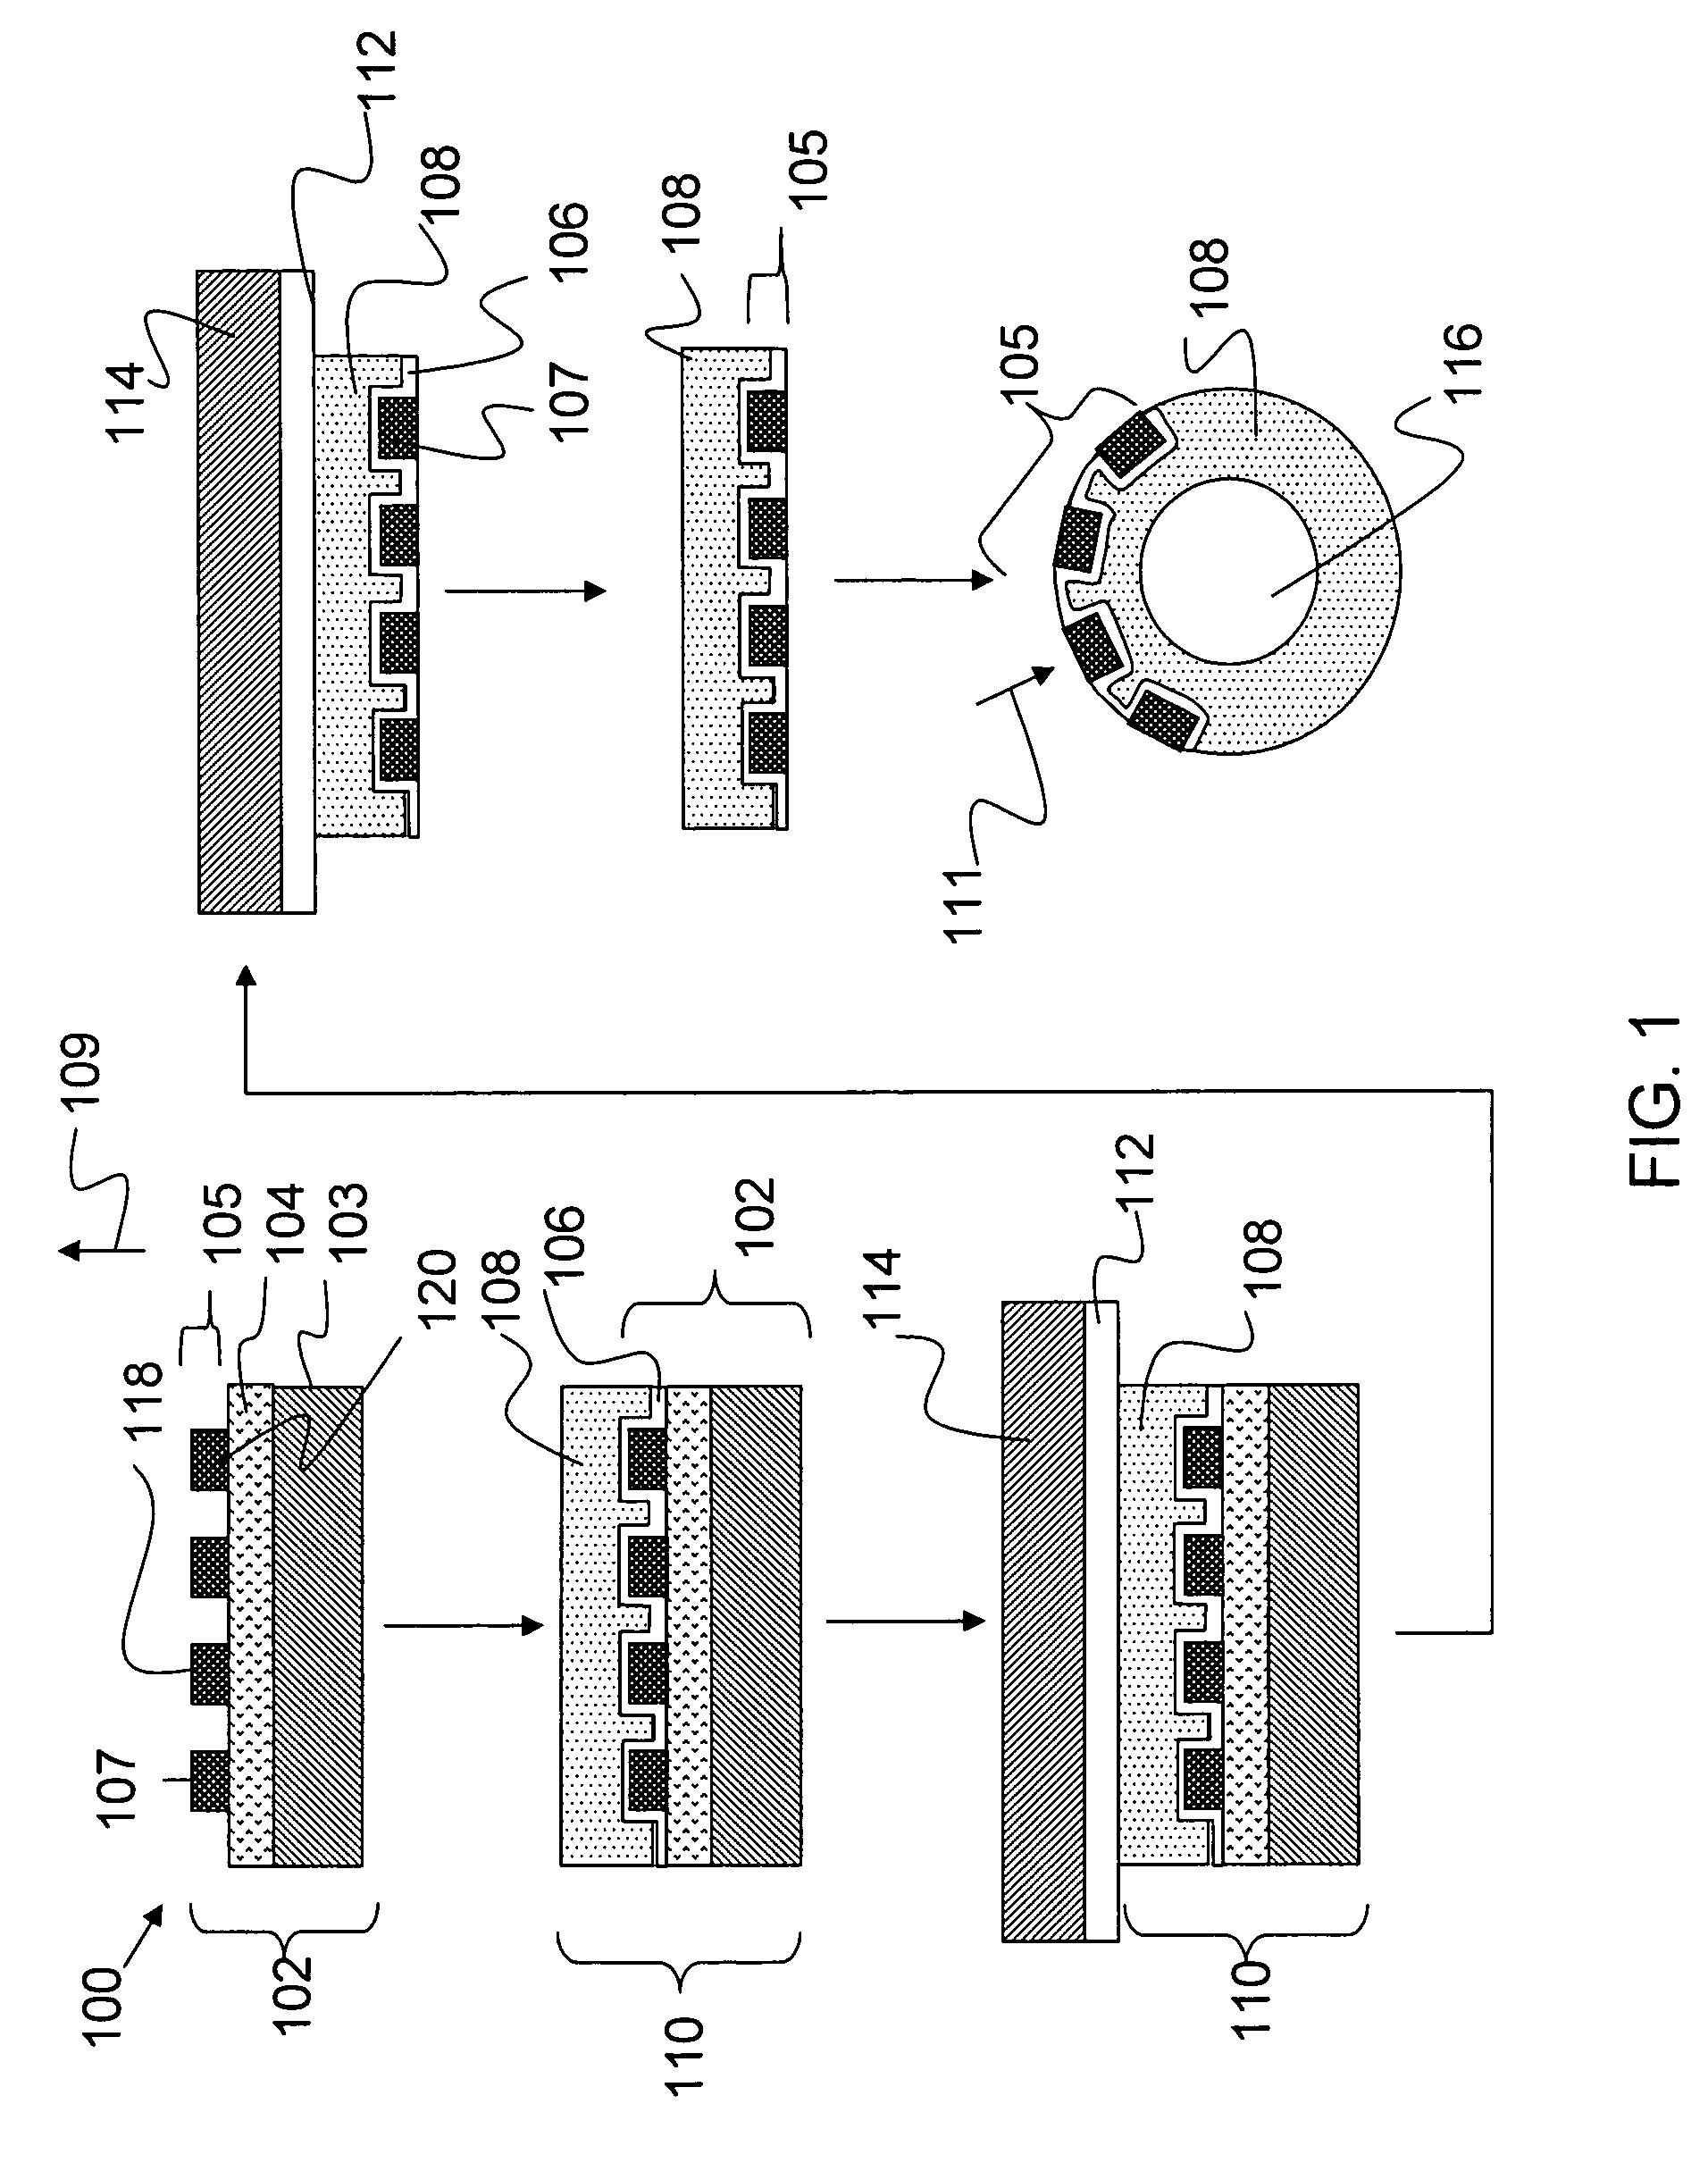 Method for conforming a micro-electronic array to arbitrary shapes